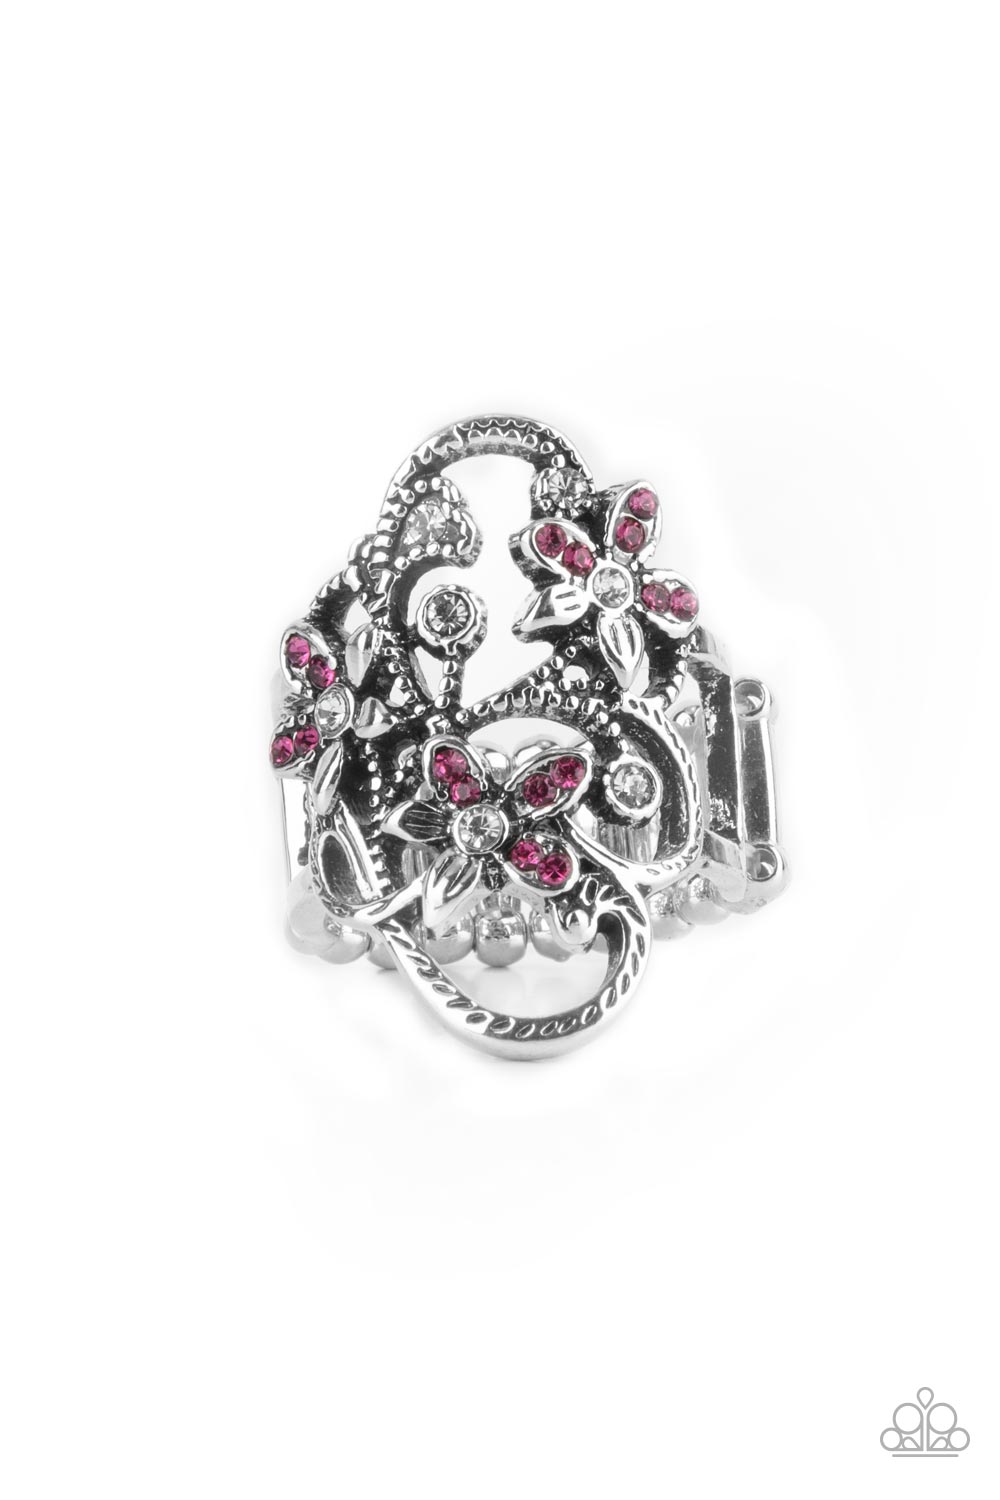 Flirtatiously Flowering Pink Ring - Paparazzi Accessories- lightbox - CarasShop.com - $5 Jewelry by Cara Jewels